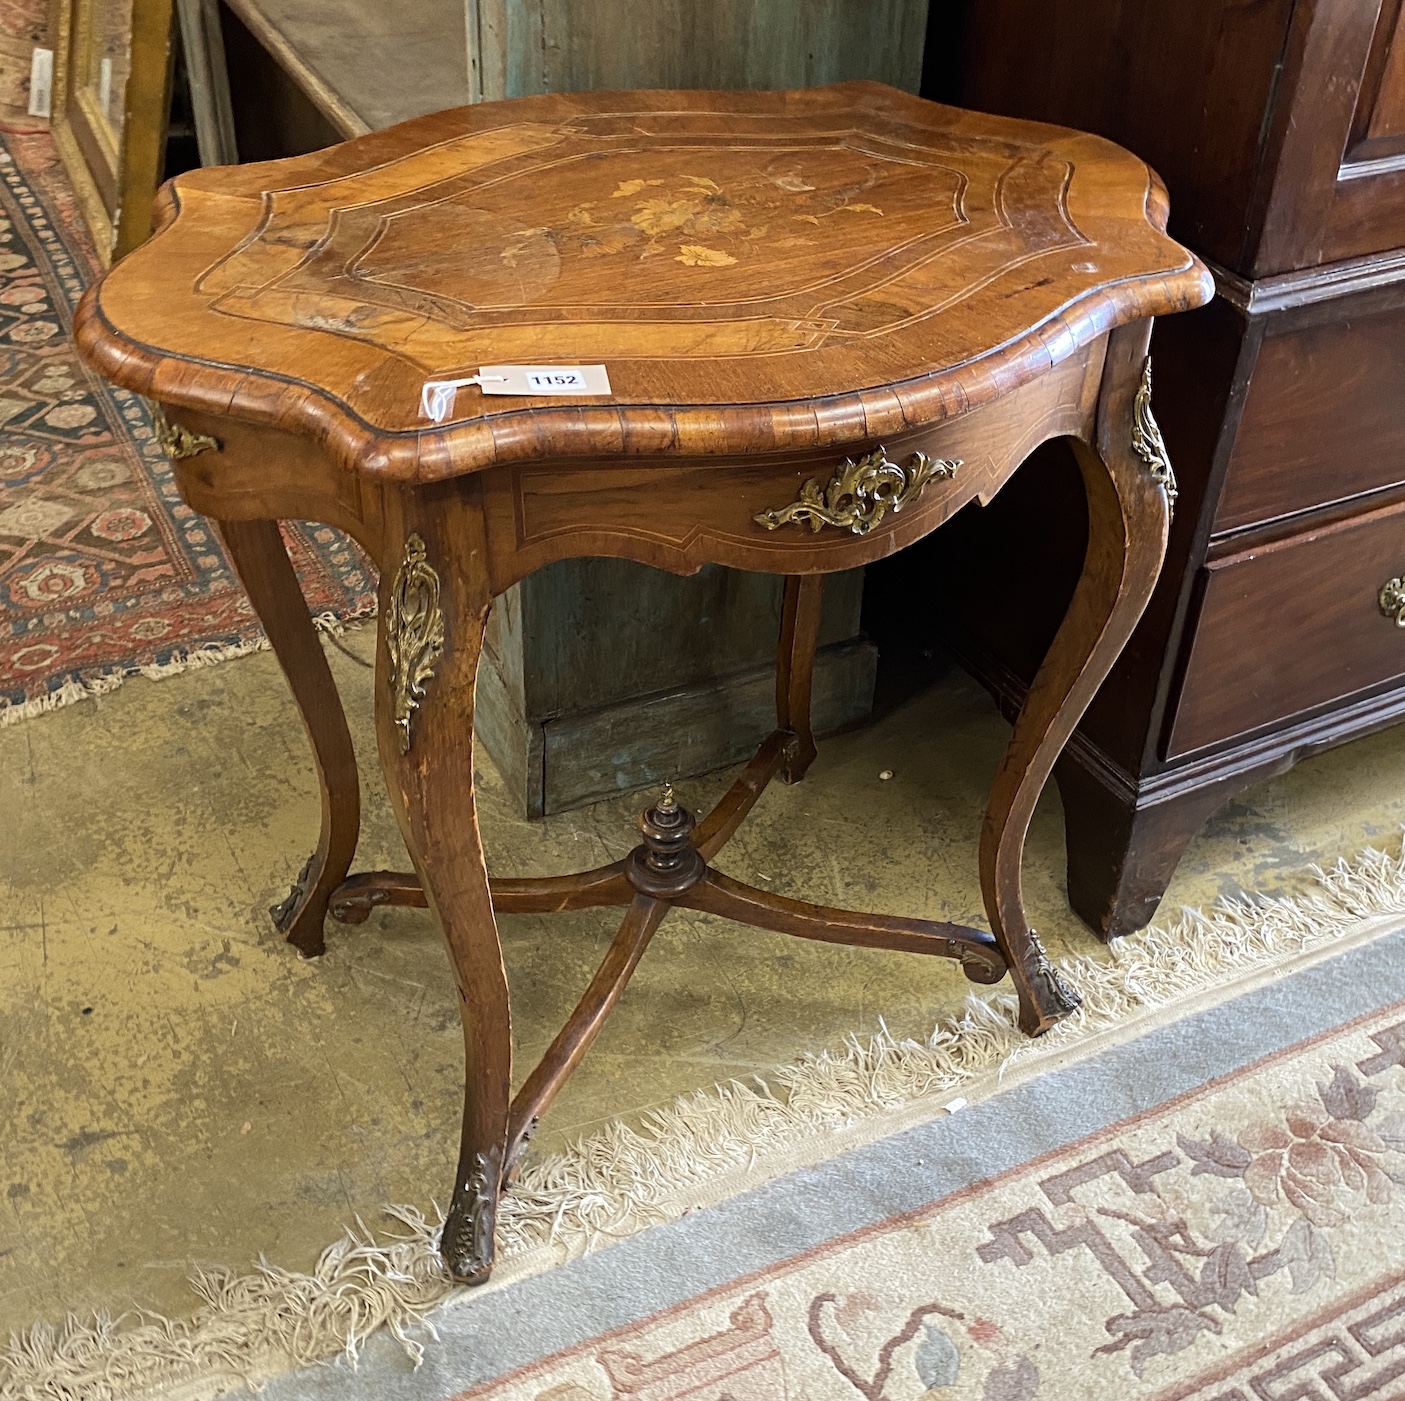 A 19th century French gilt metal mounted marquetry inlaid walnut oval centre table, width 78cm, depth 56cm, height 75cm